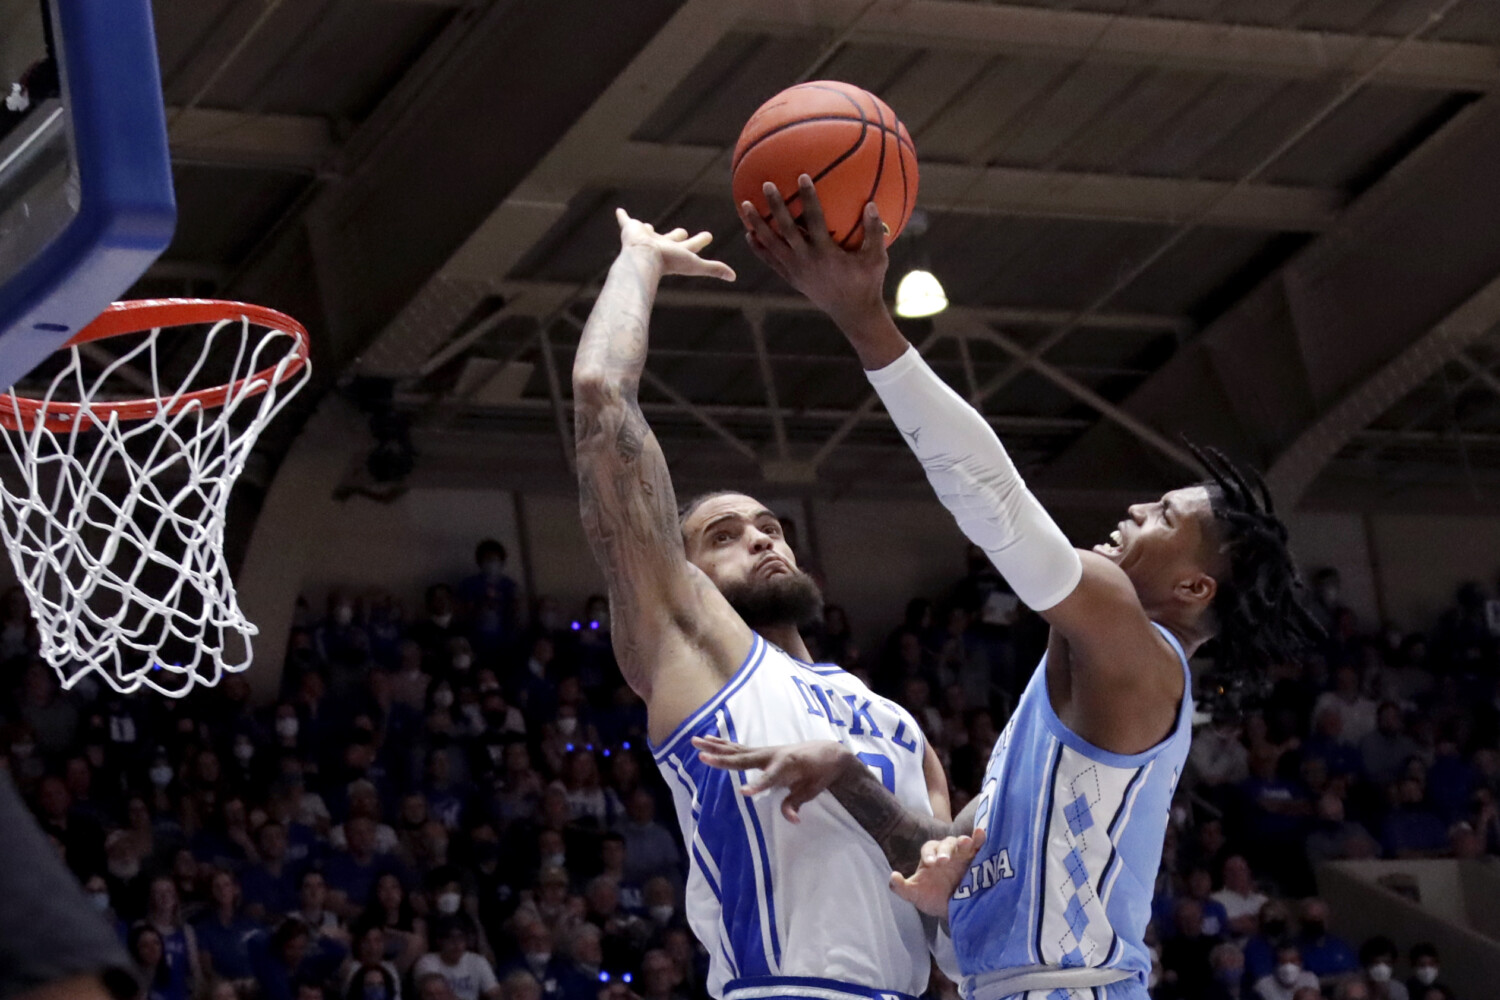 Duke and North Carolina are basketball rivals, but off the court